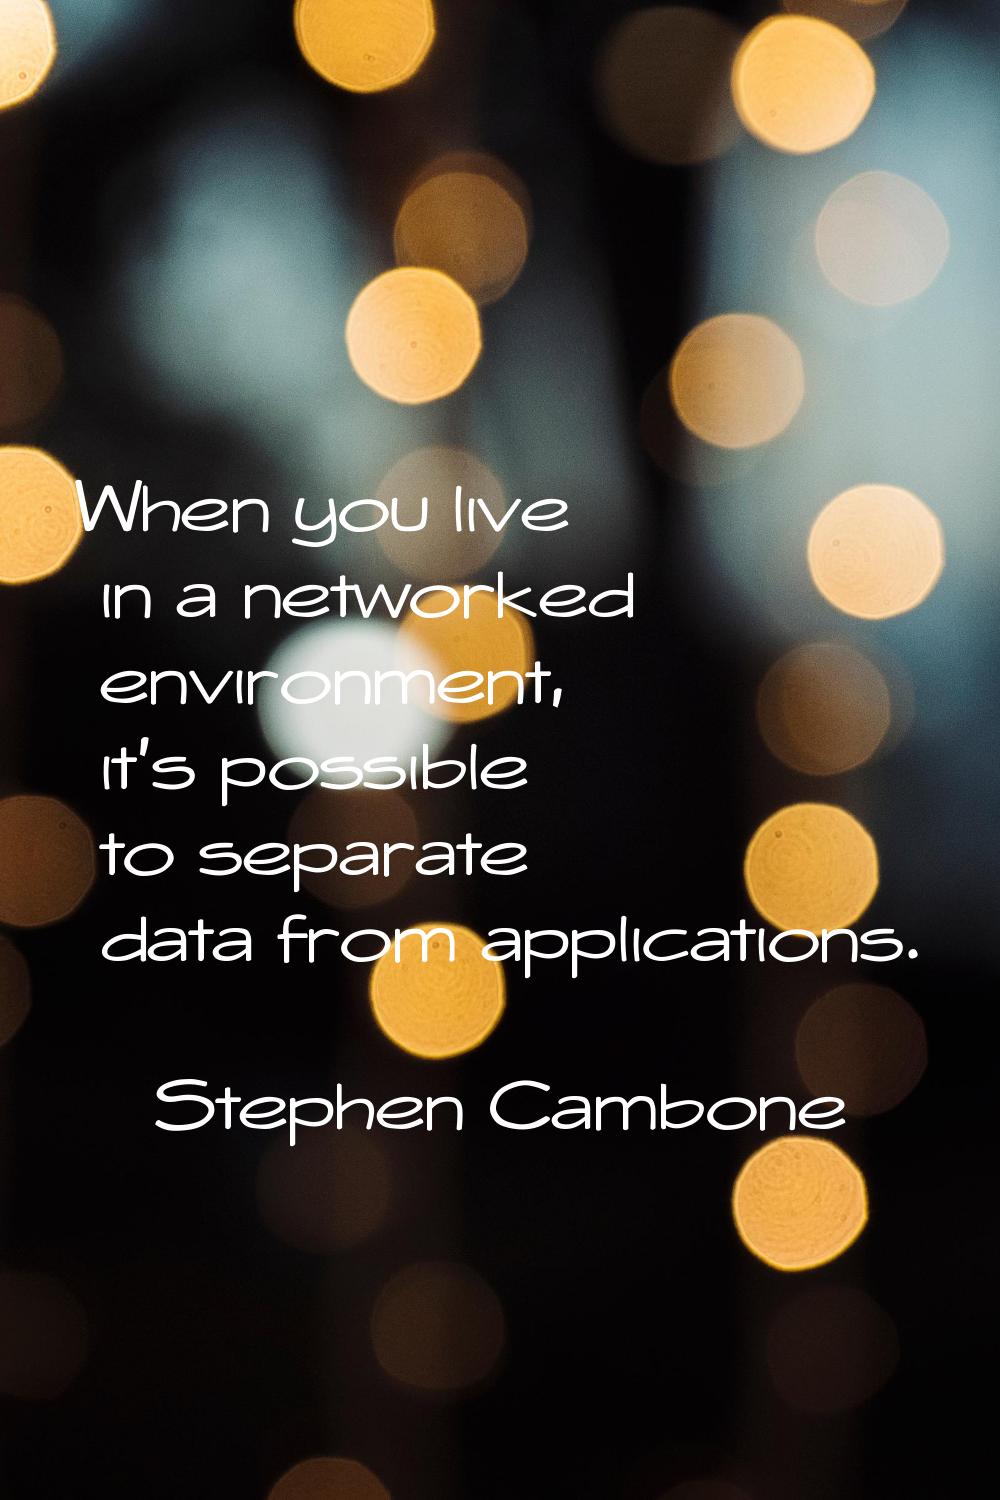 When you live in a networked environment, it's possible to separate data from applications.